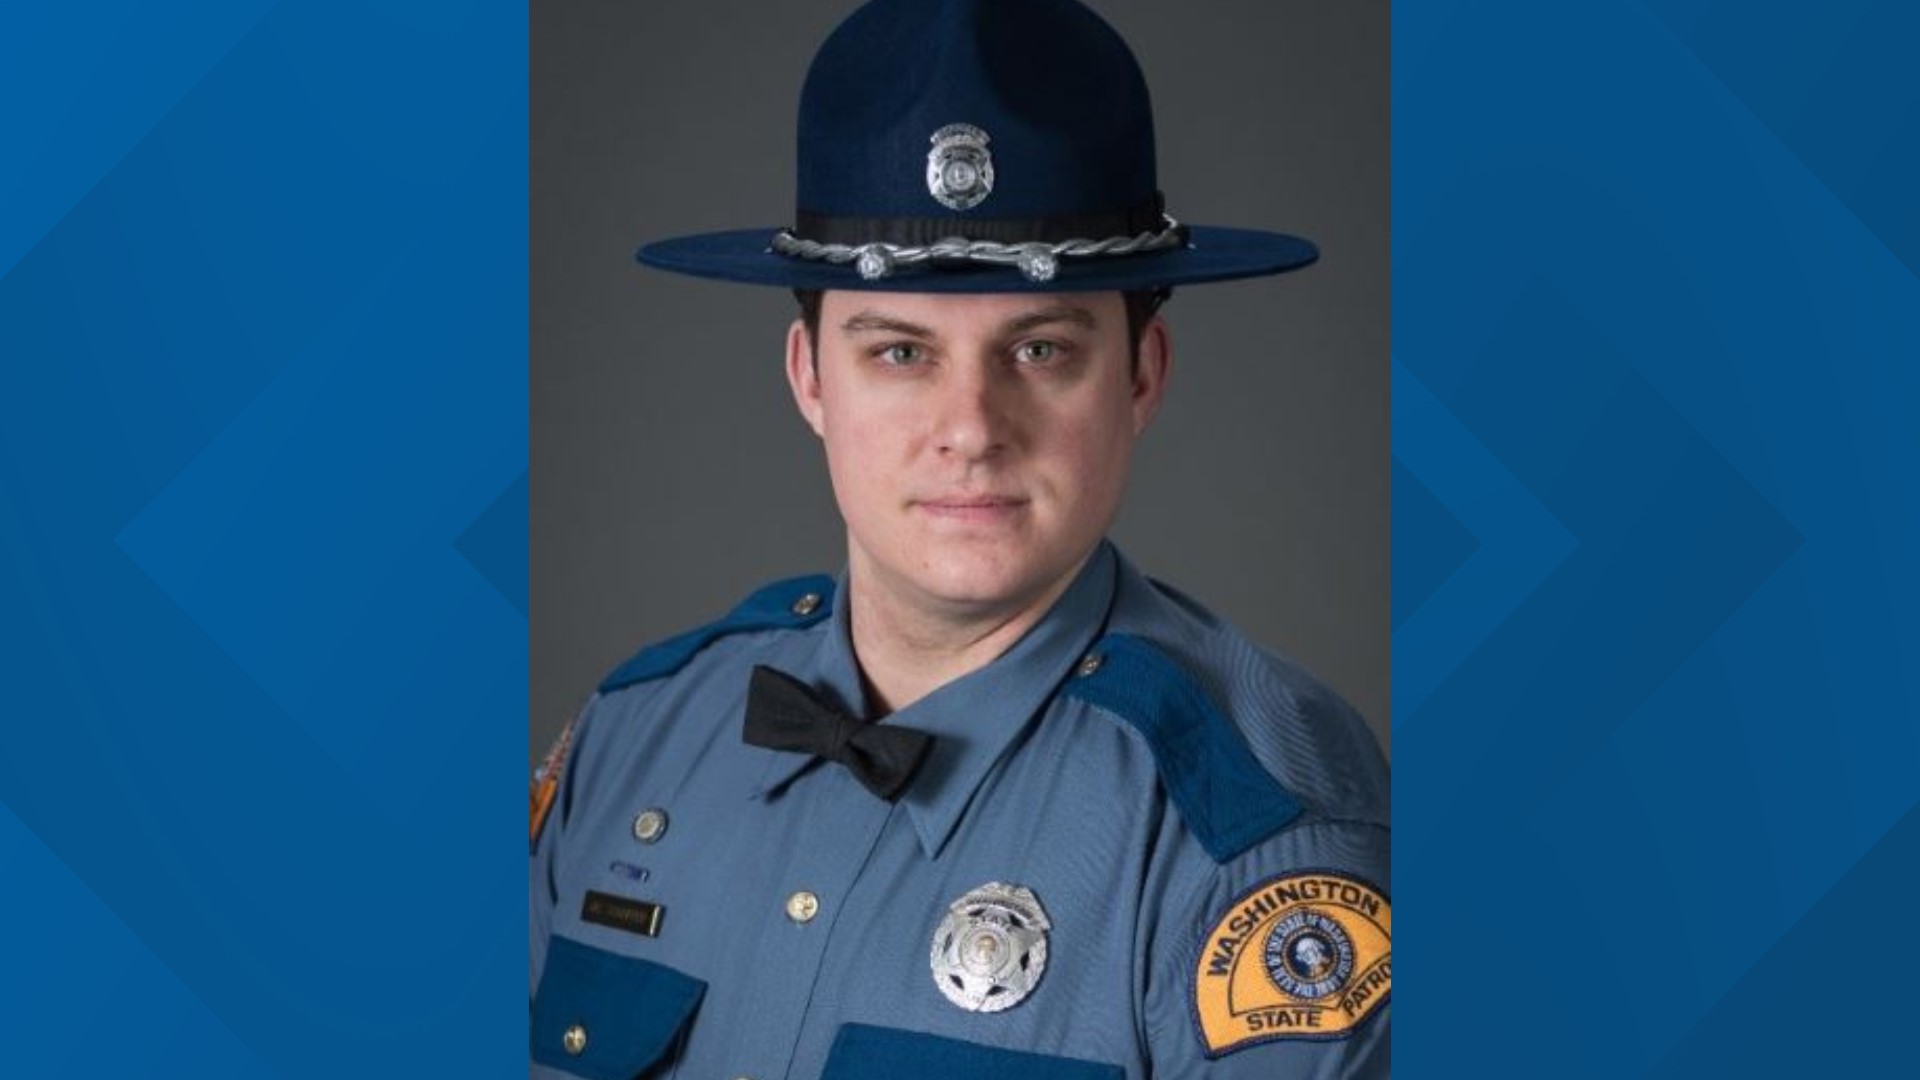 Trooper Justin Schaffer, 28, was deploying spike strips along I-5 when he was struck by the suspect’s vehicle, according to WSP Chief John Batiste.